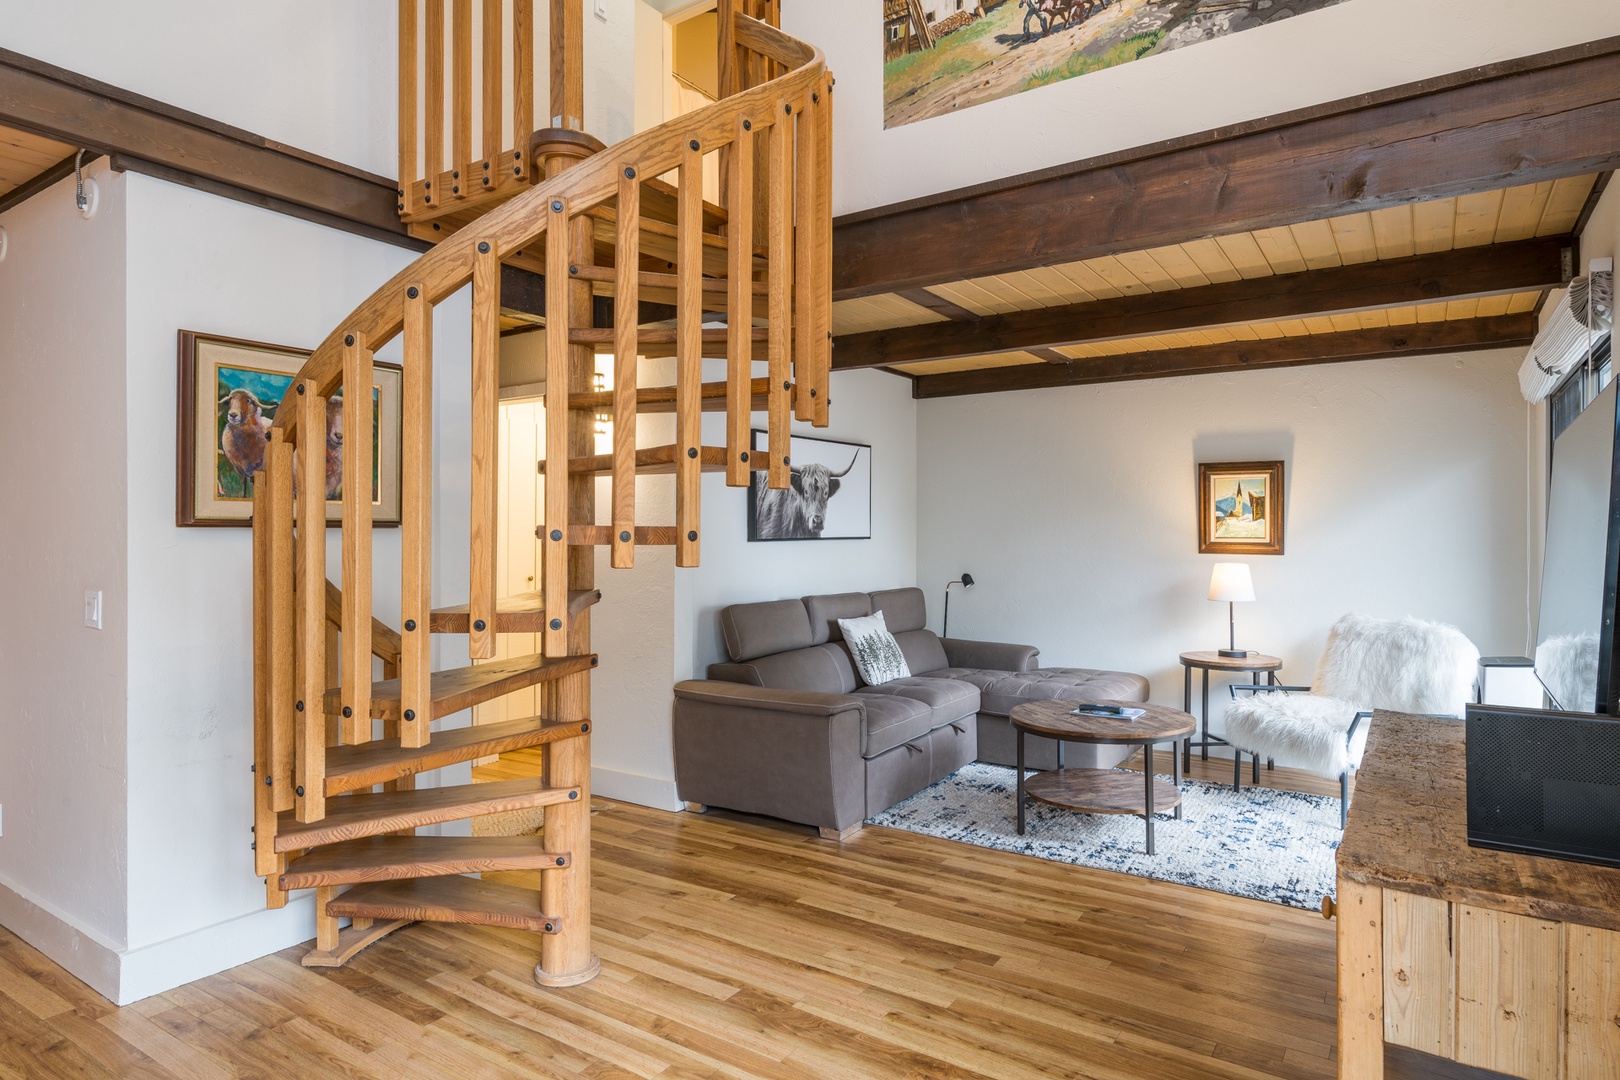 Ketchum Vacation Rentals, Bavarian Warm Springs Charm - Spiral steps to the top floor